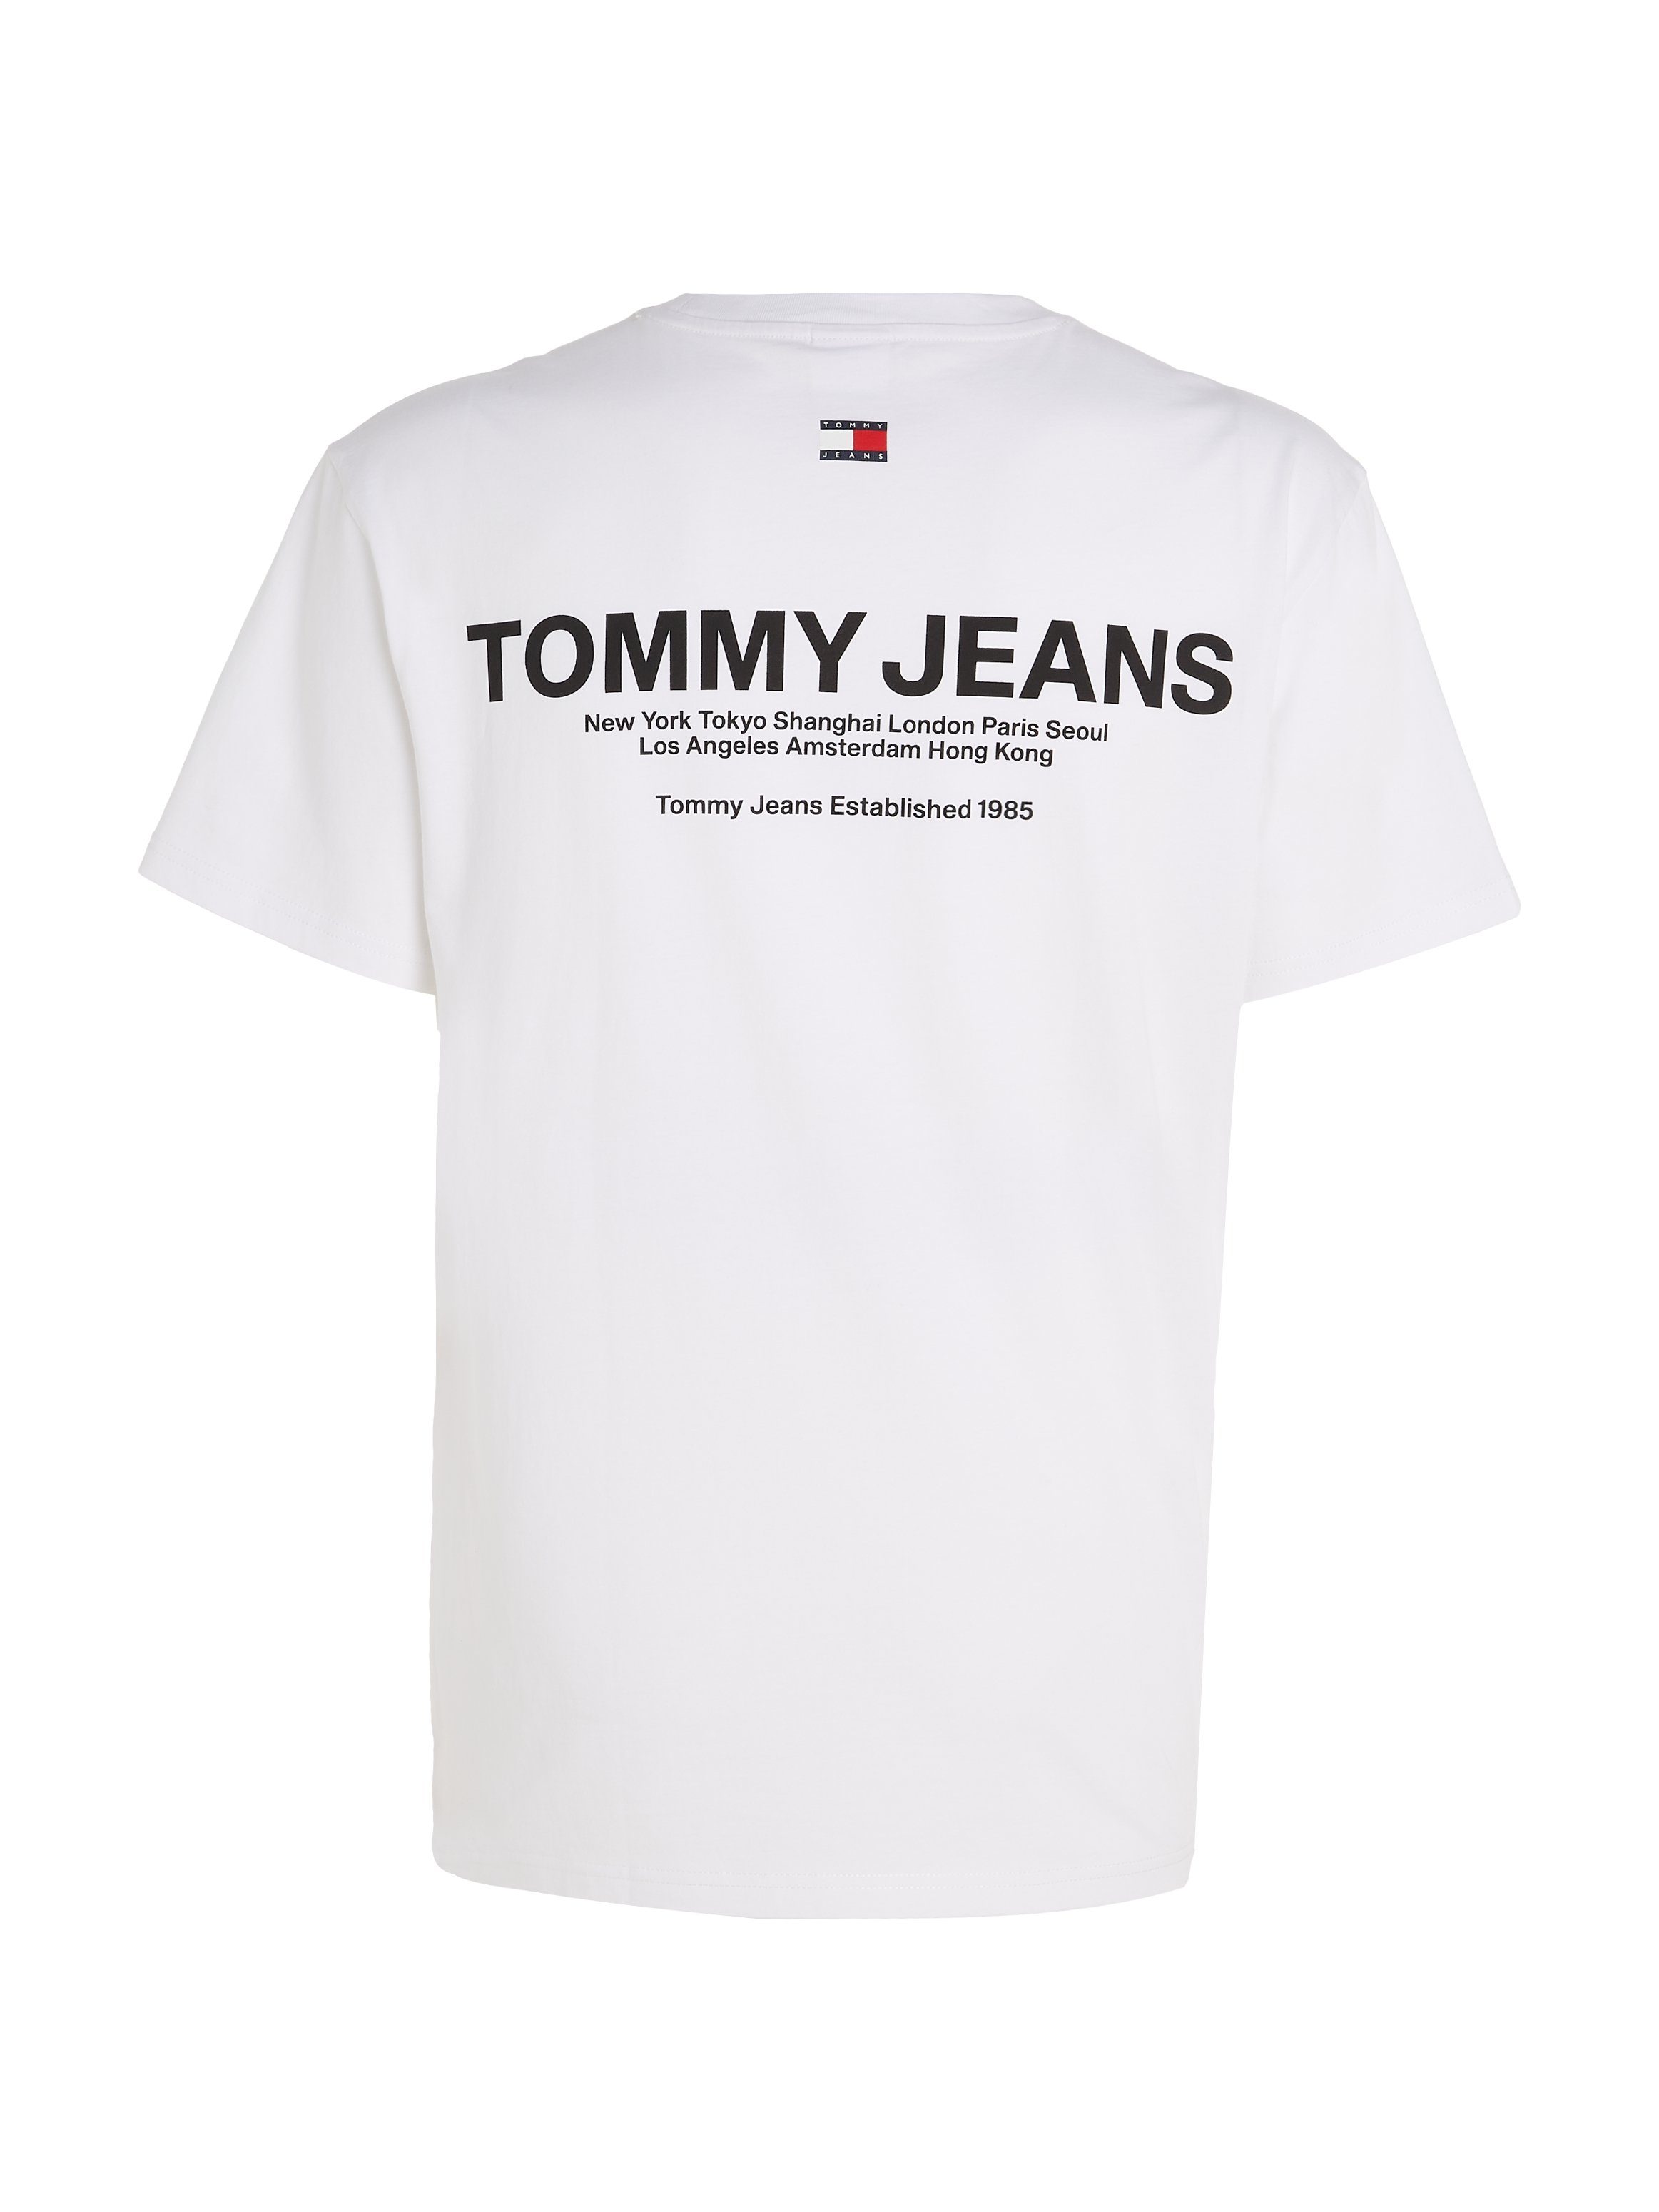 TEE LINEAR TJM Jeans PRINT BACK White T-Shirt Tommy CLSC